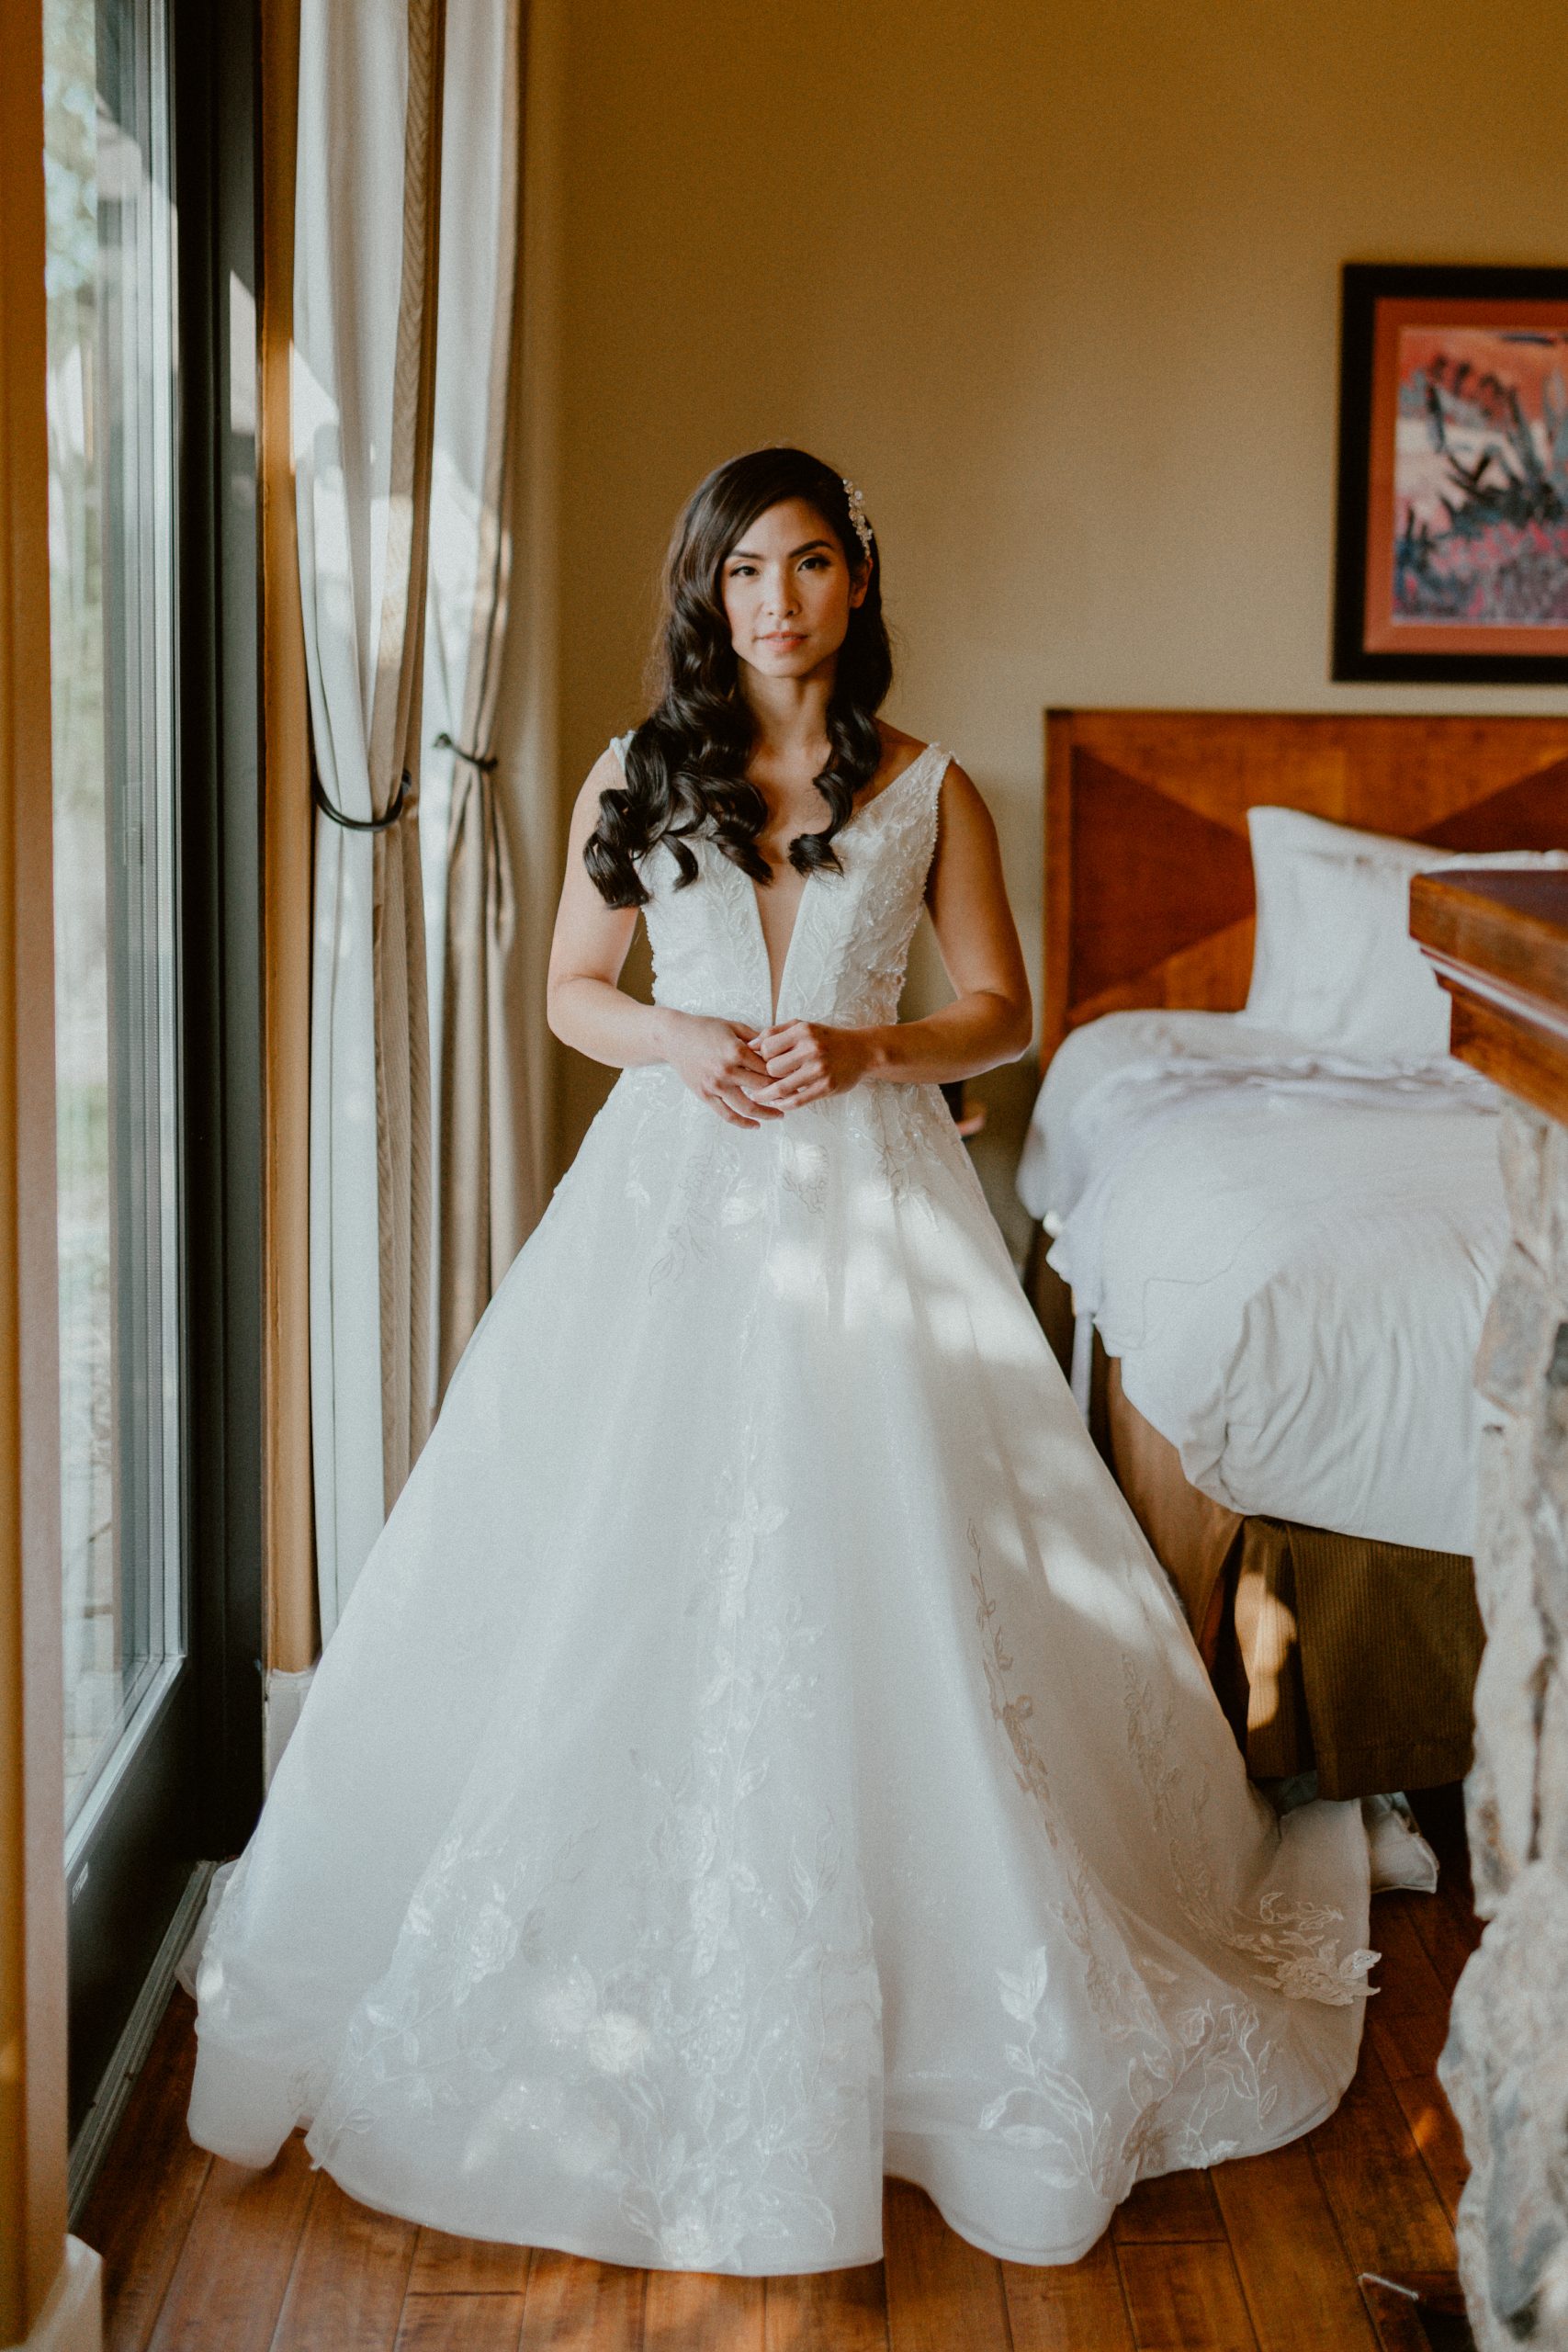 Full bridal look pre-ceremony photography for Fall Washington Elopement and wedding inspiration | Washington Elopement, Destination Elopement Photographer, Cave B Inn Elopement Inspiration, Washington Elopement ideas, PNW Fall Wedding Inspiration, Fall Outdoor Wedding Ideas,Fall Wedding Inspiration, PNW Outdoor Wedding Ideas | chelseaabril.com